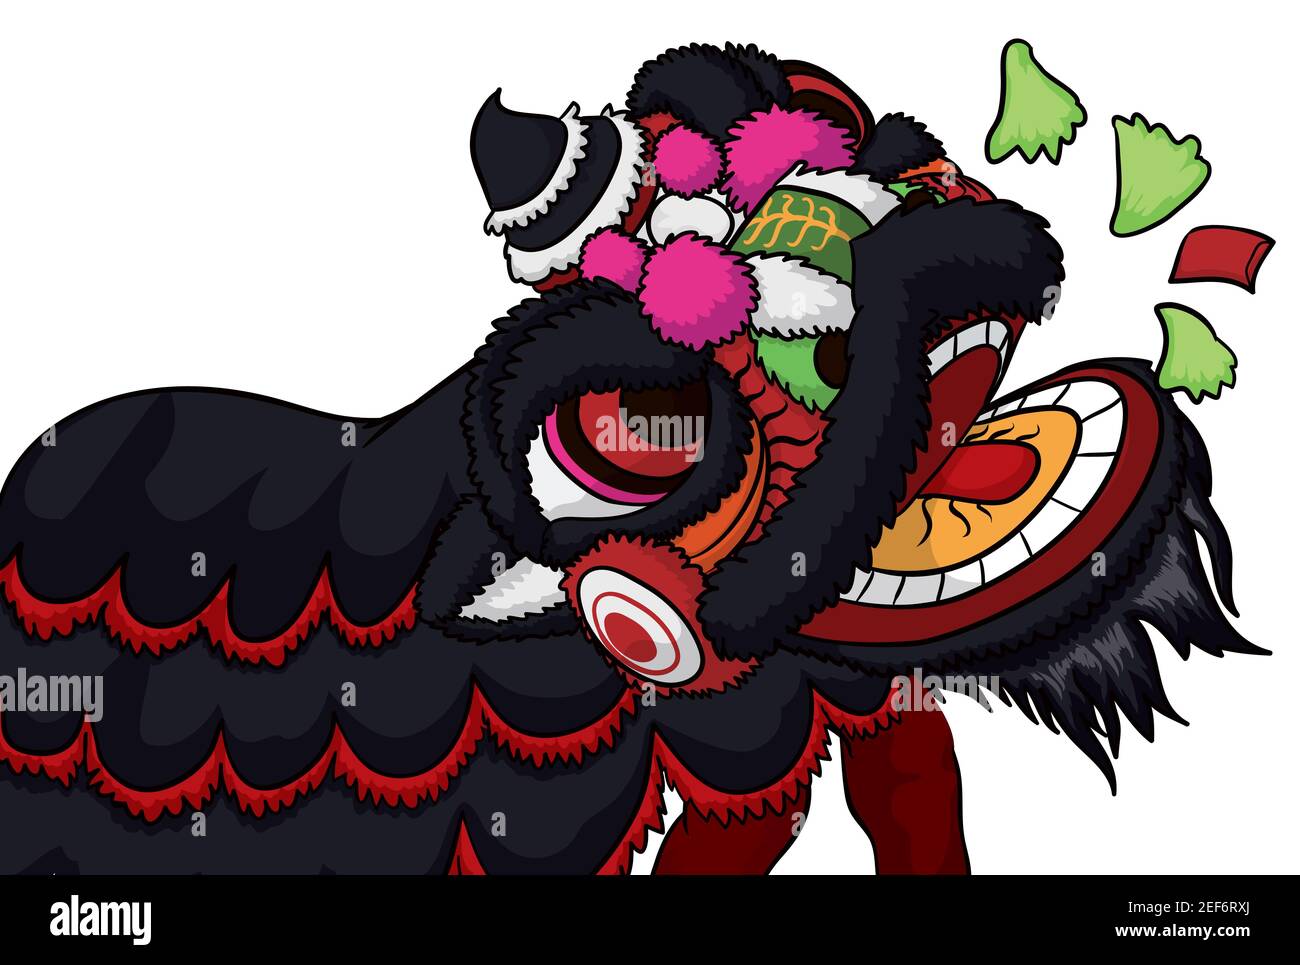 Black lion and dancers performing the traditional performance of lettuce eating and red envelope or 'cai qing' meaning 'plucking the greens'. Stock Vector